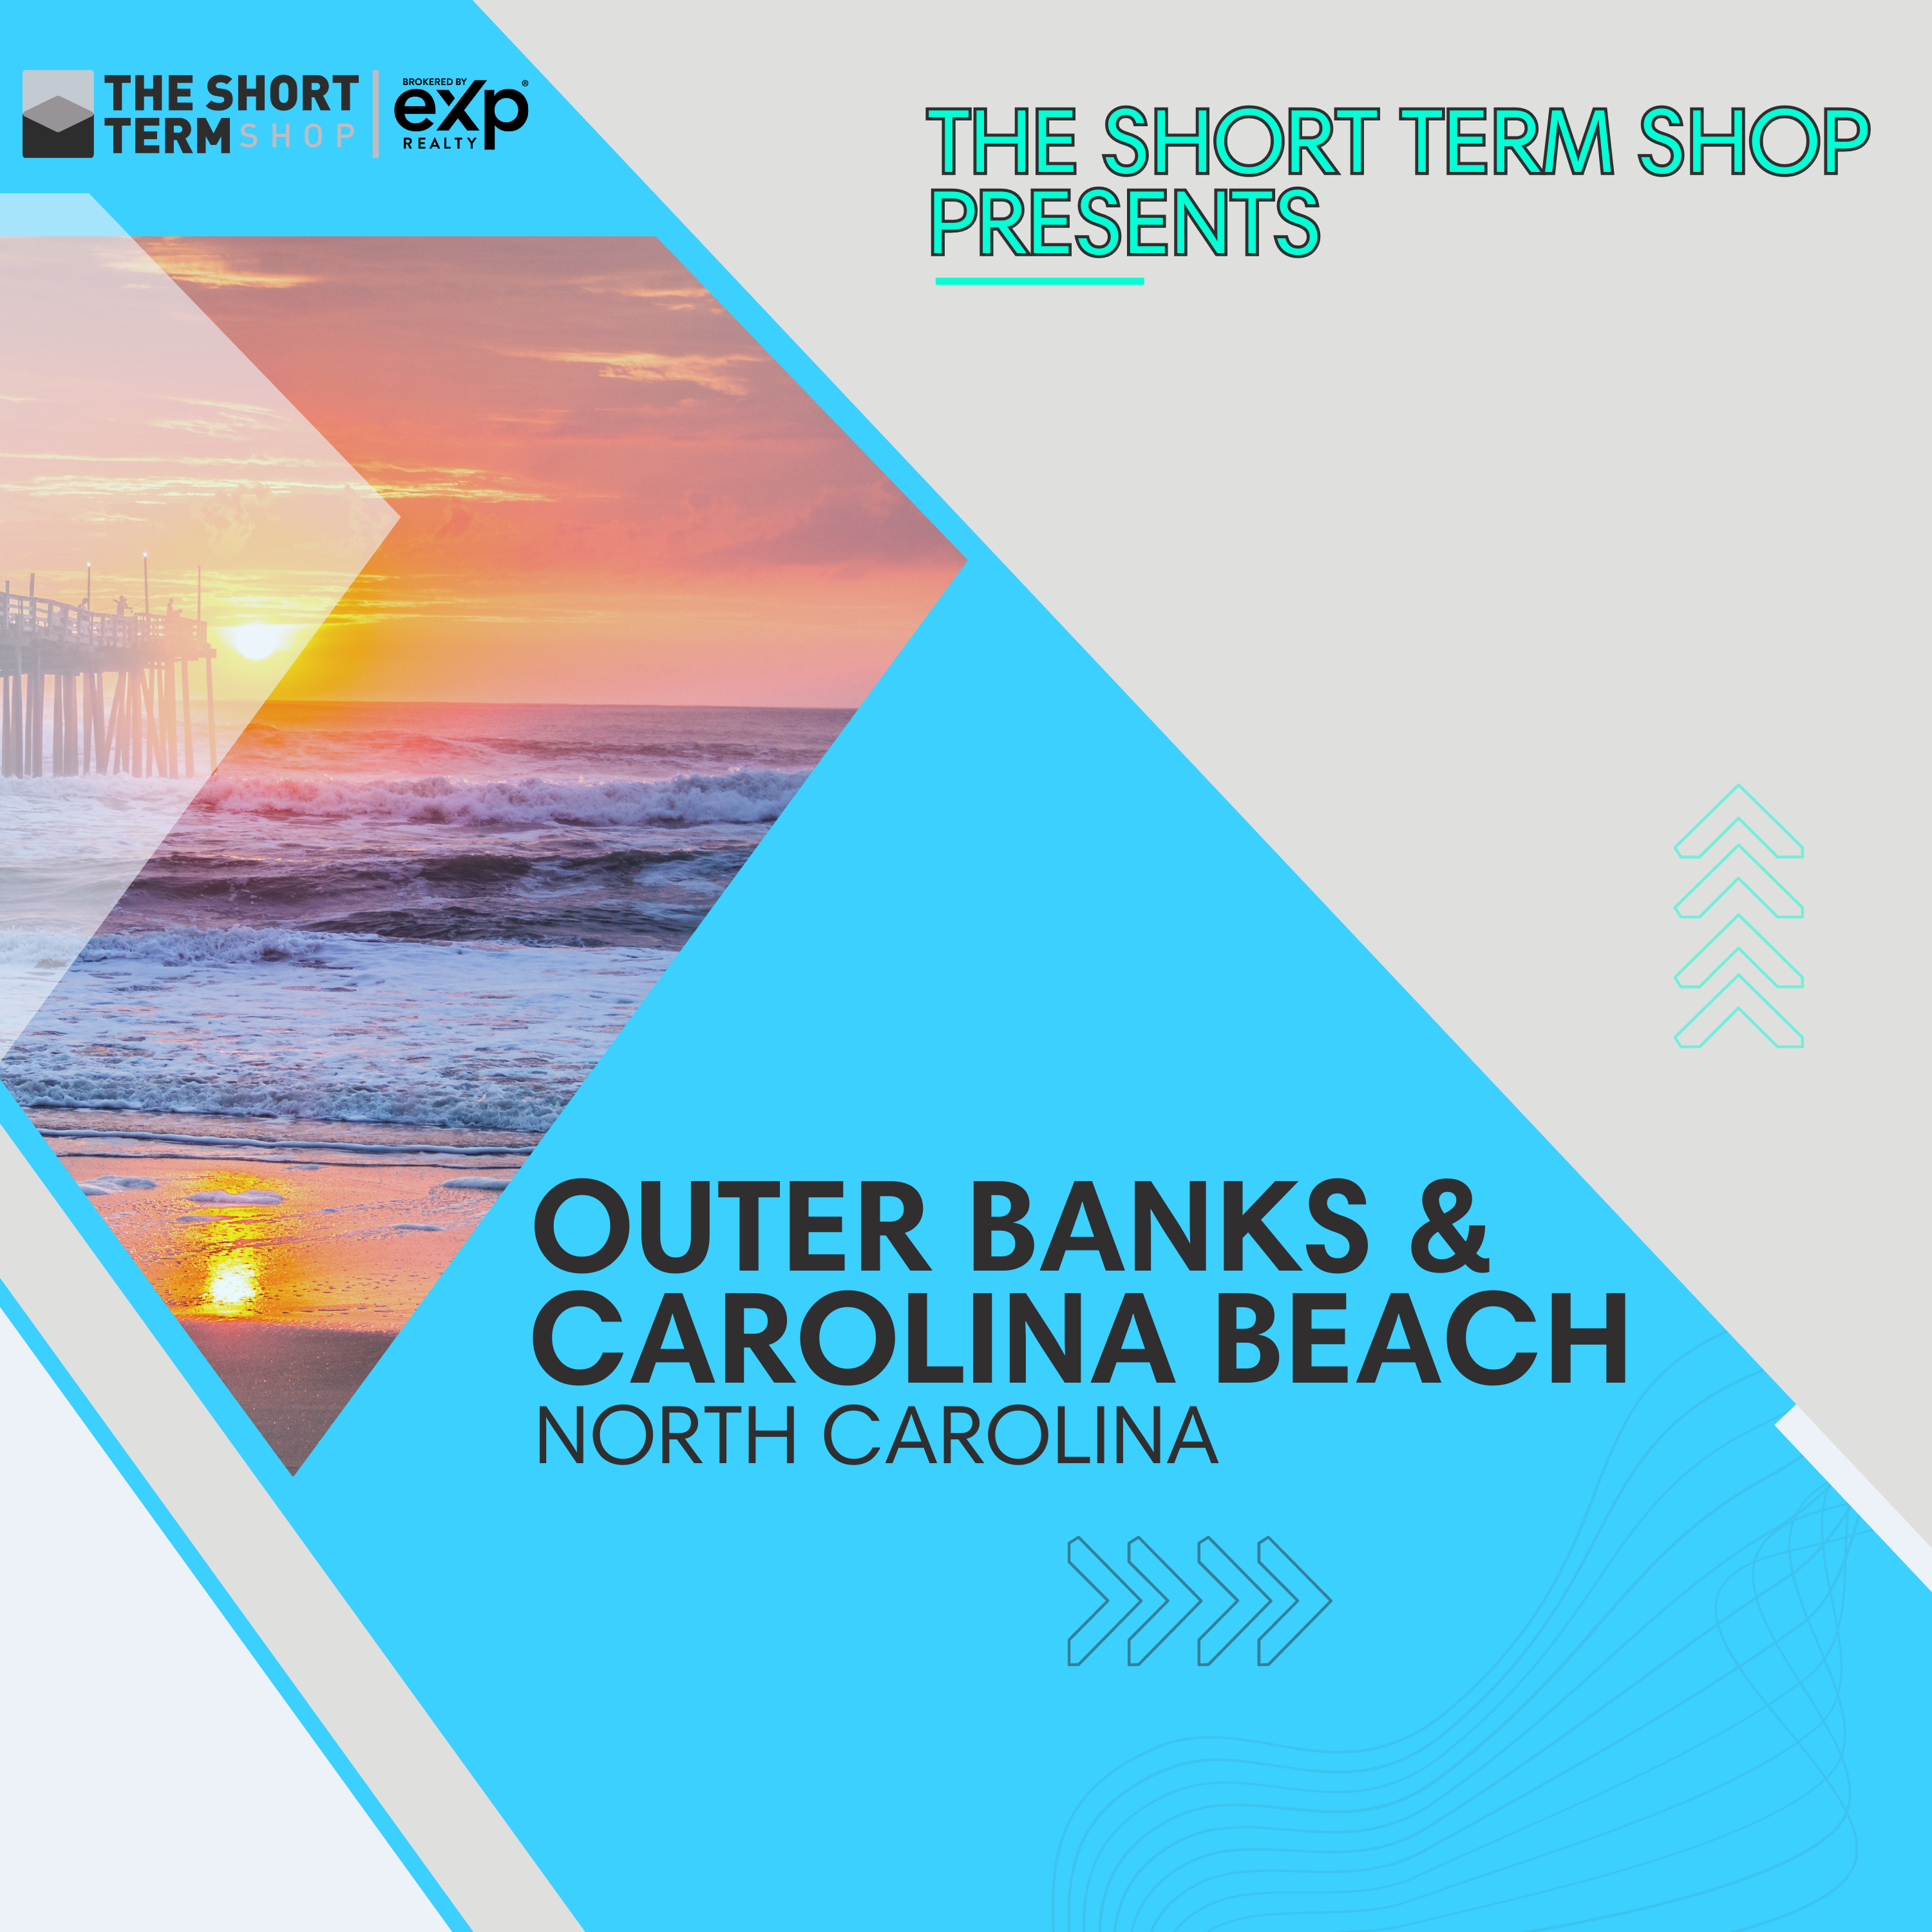 The Real Estate Contract Process When Investing in Short Term Rentals In The Outer Banks And Carolina Beach